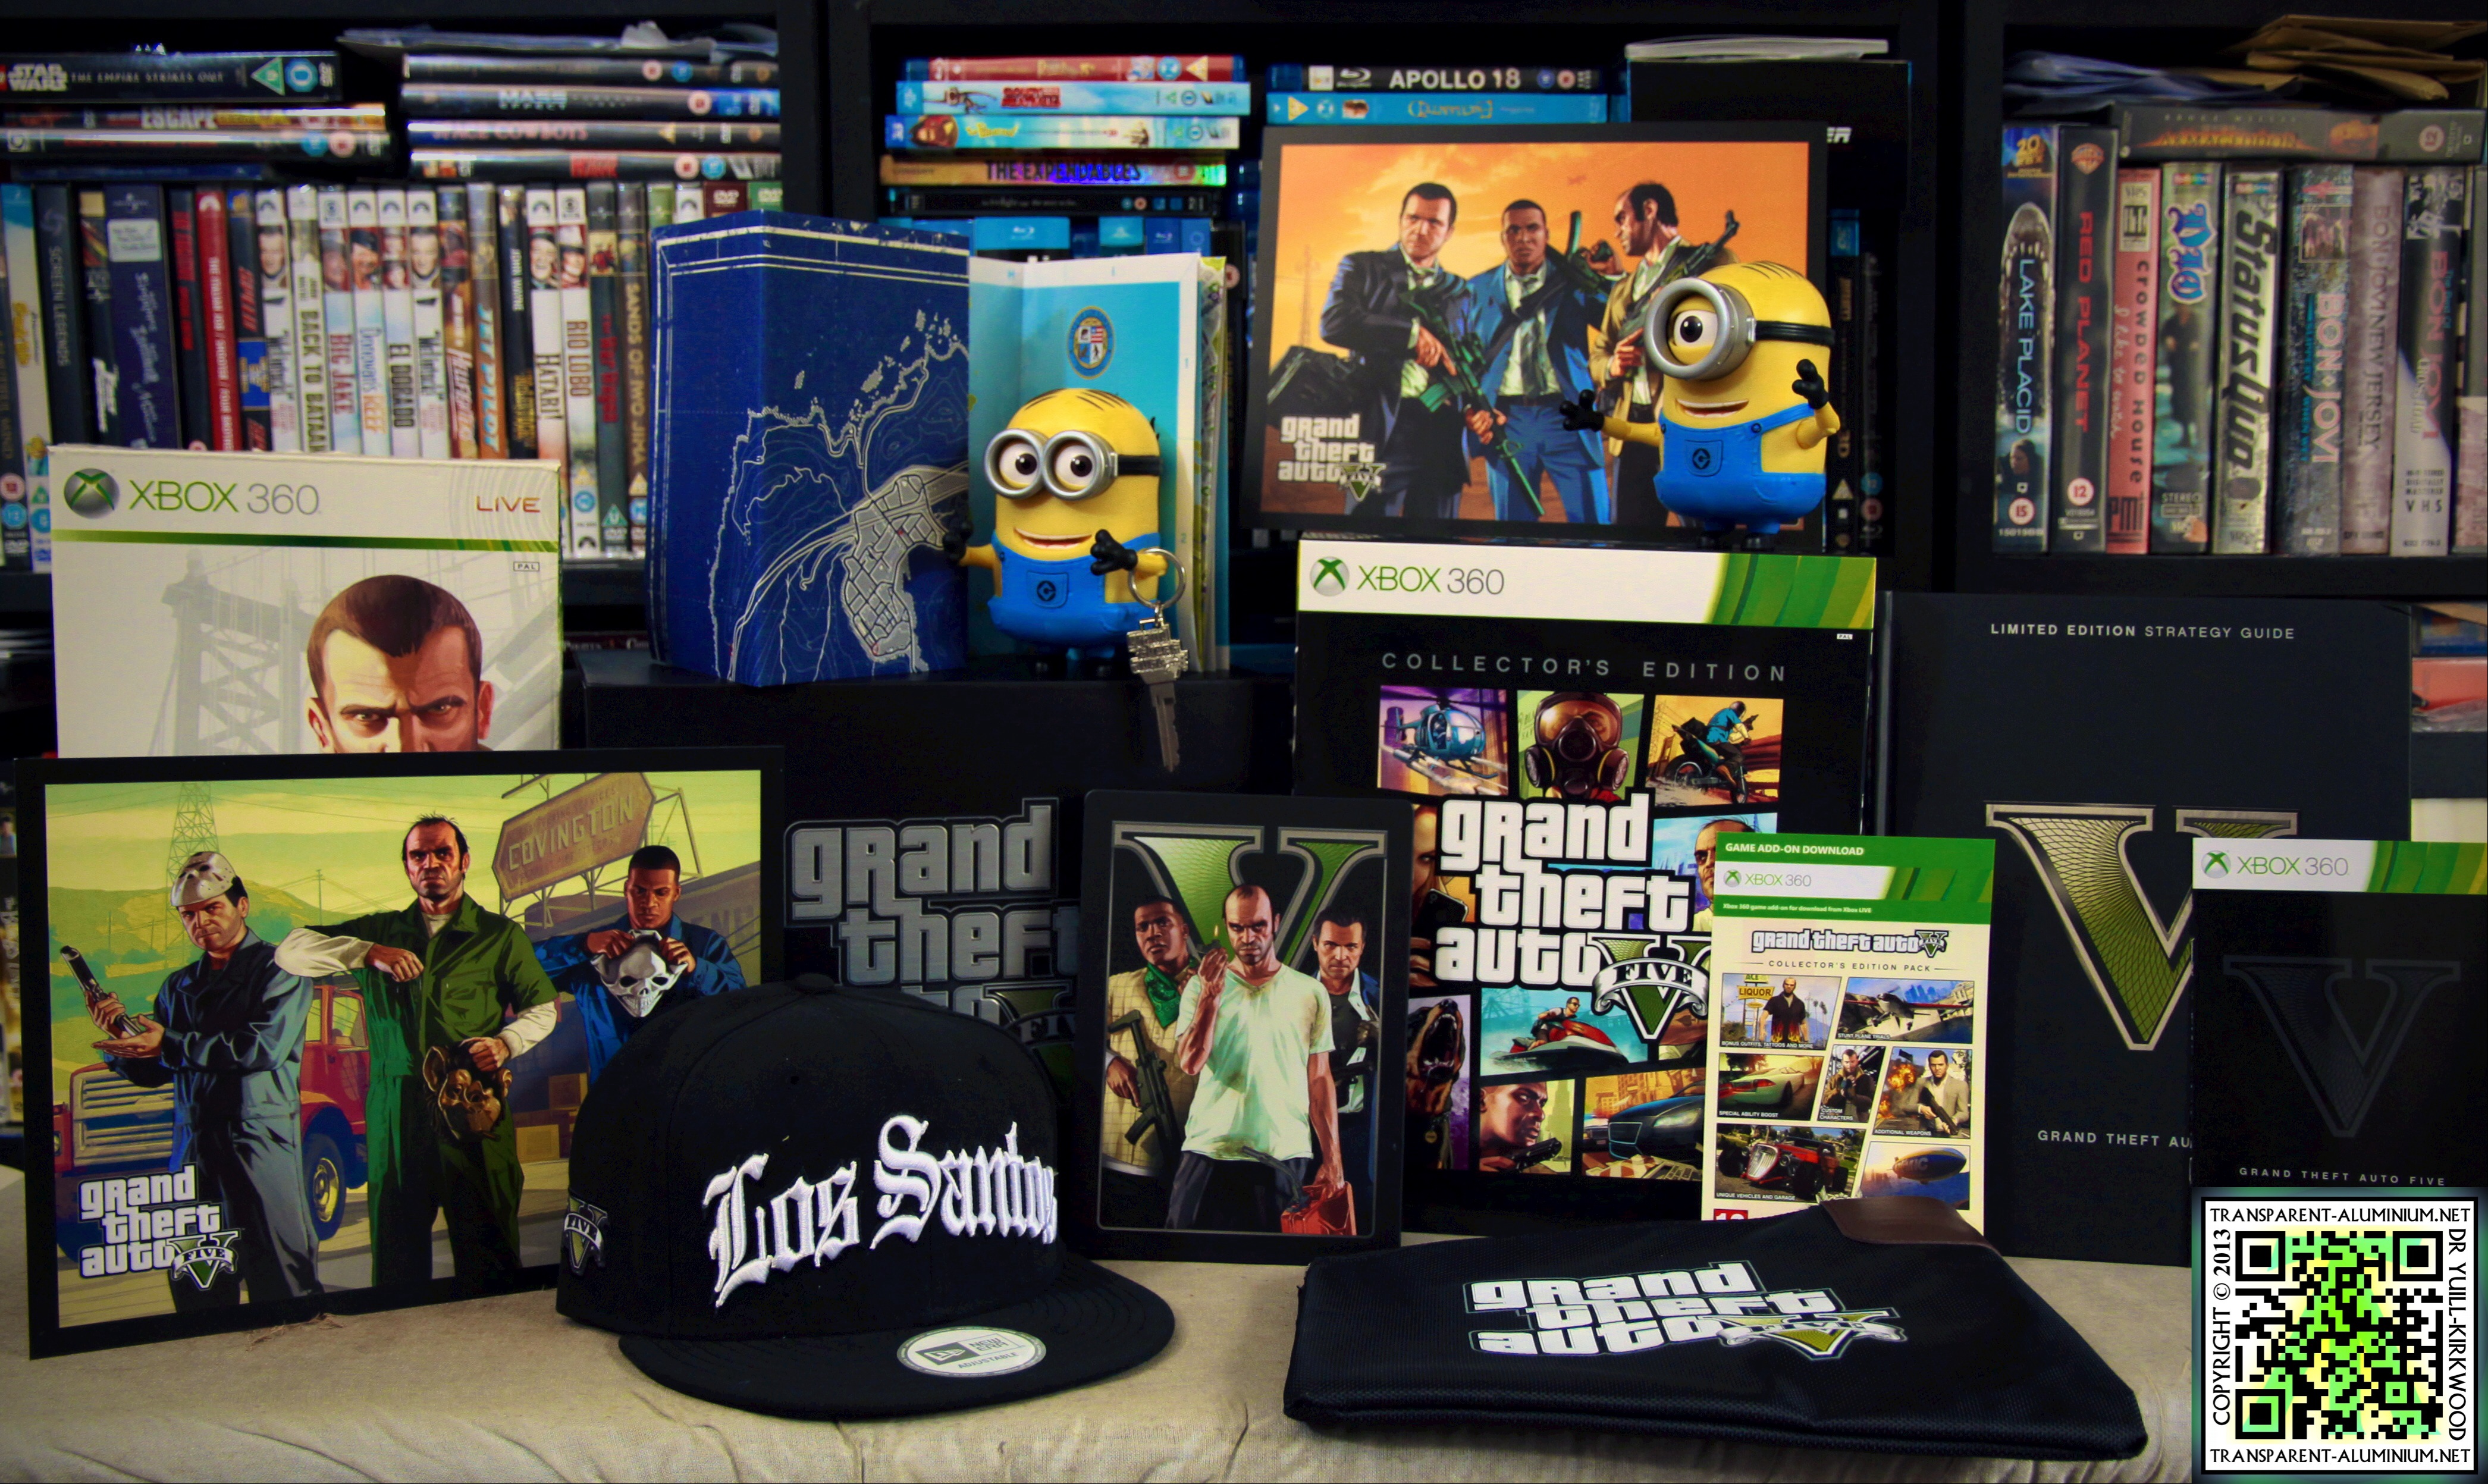 Grand Theft Auto 4 Collectors Edition Unboxing gta 4 Xbox 360 Unboxing 